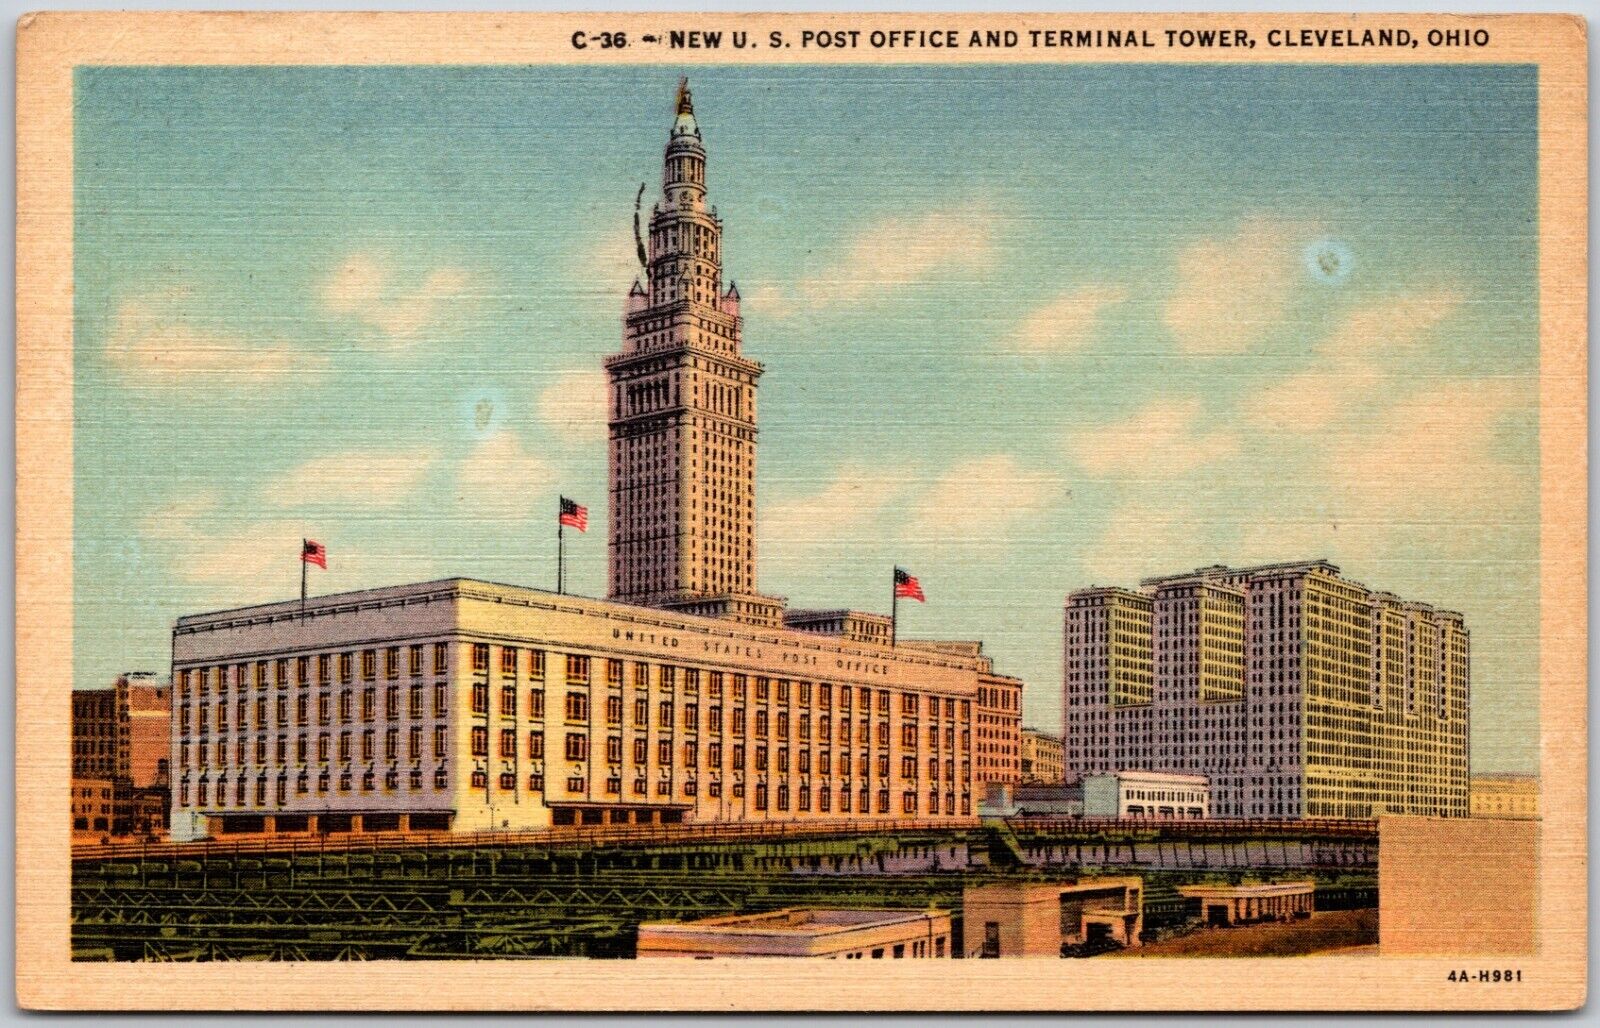 New U. S. Post Office and Terminal Tower, Cleveland, Ohio - Postcard